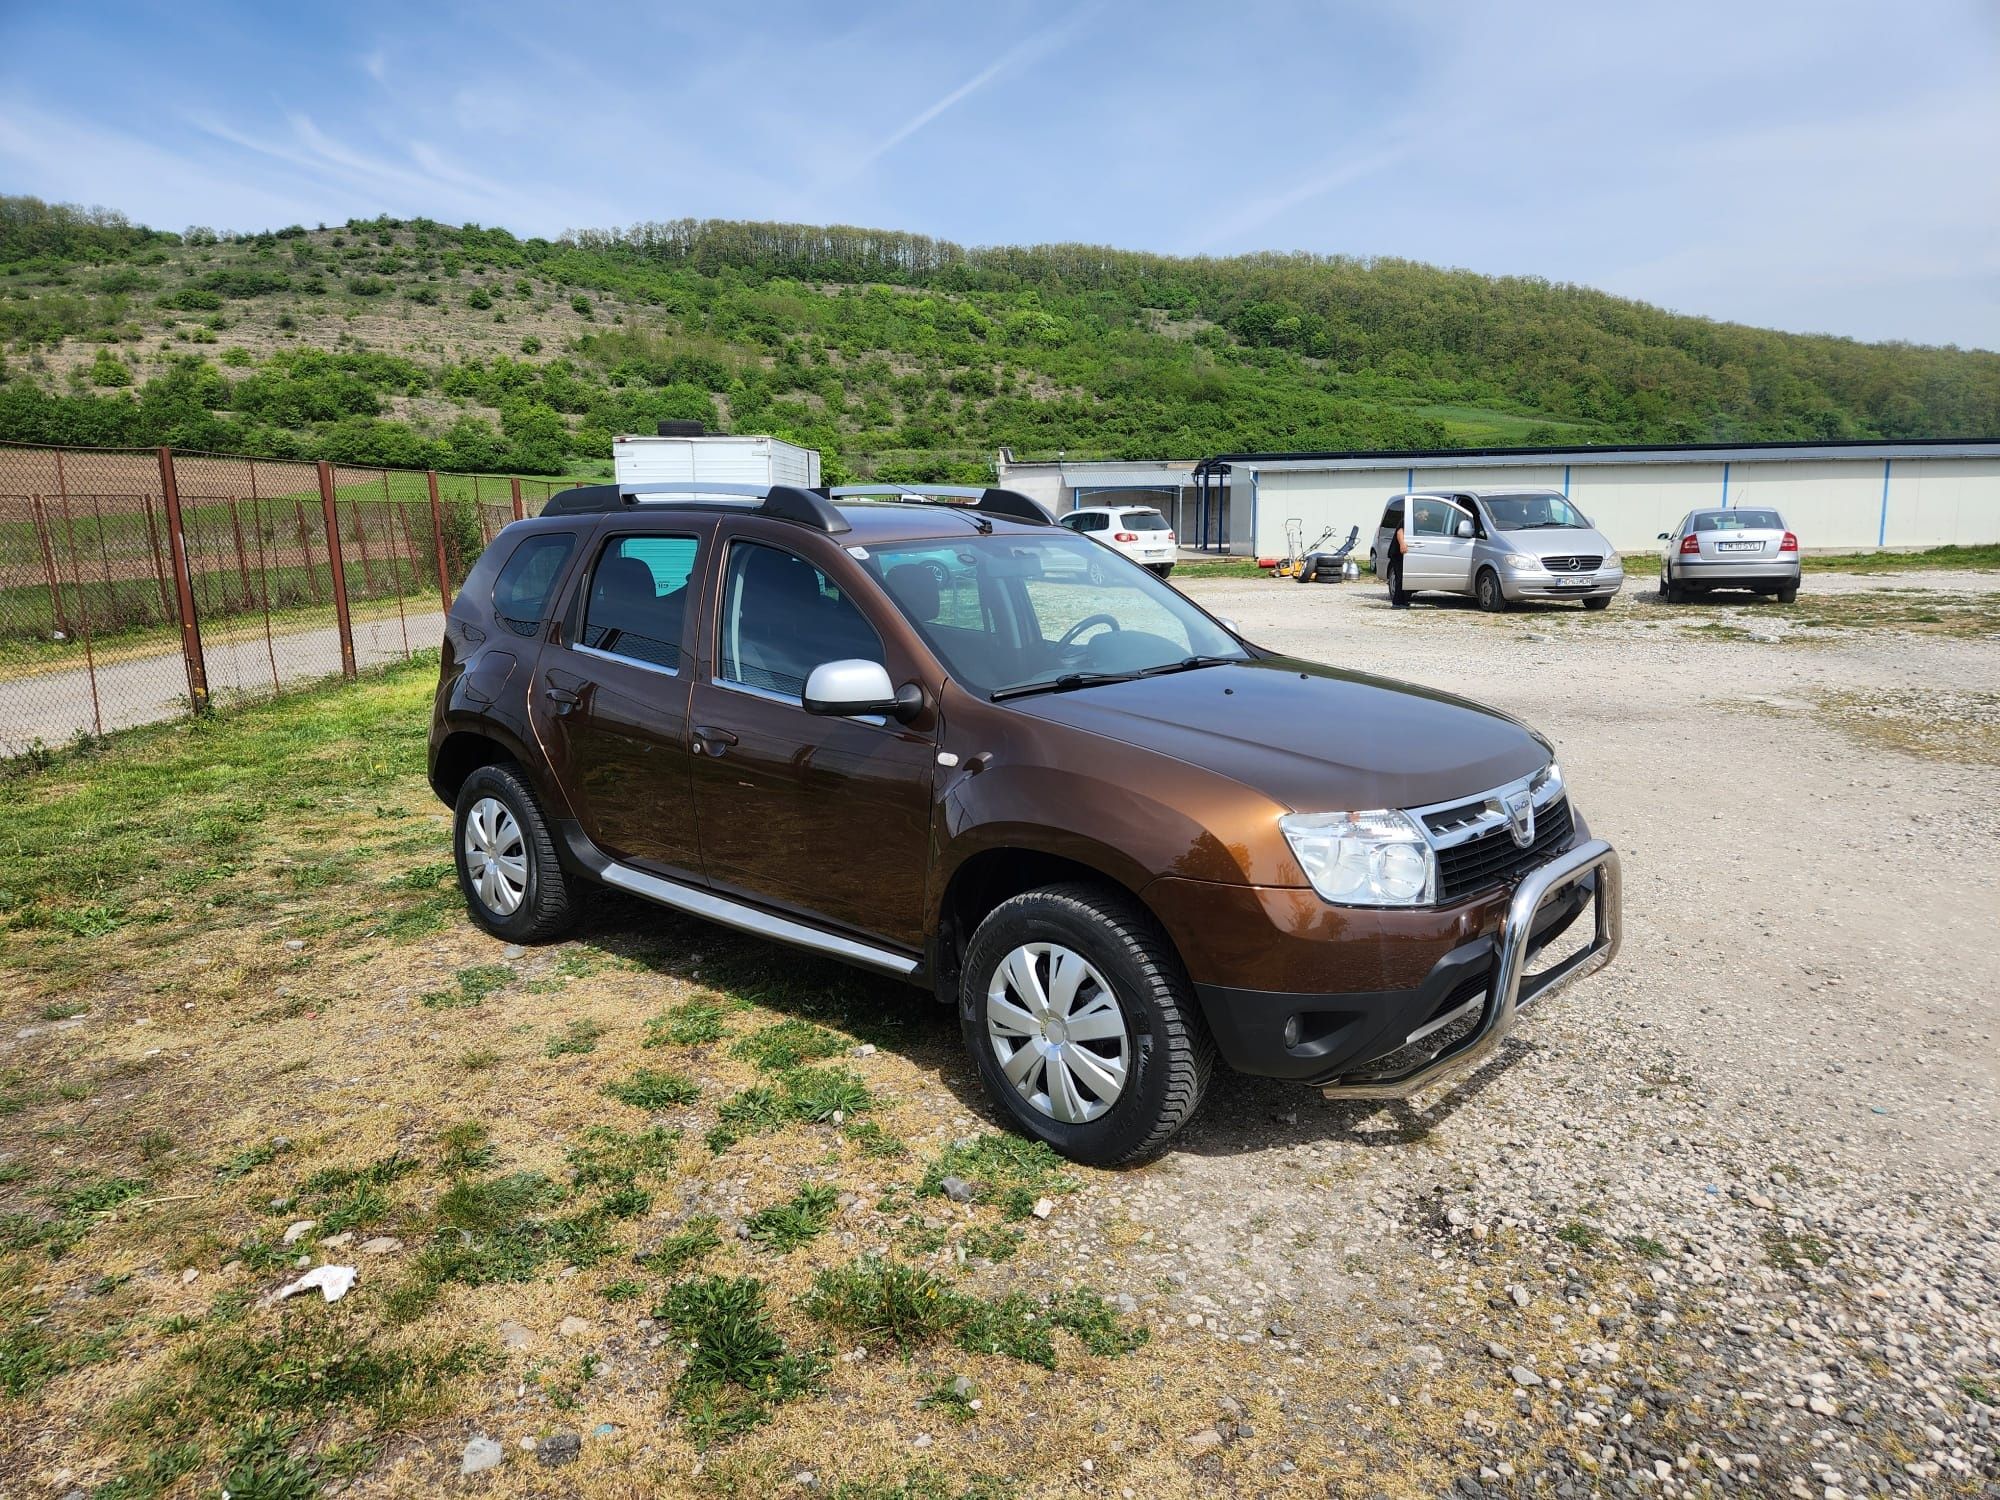 Dacia duster 1.5 dci 110 cp 6+1 trepte An fab 2011 import G
Motor 1.5